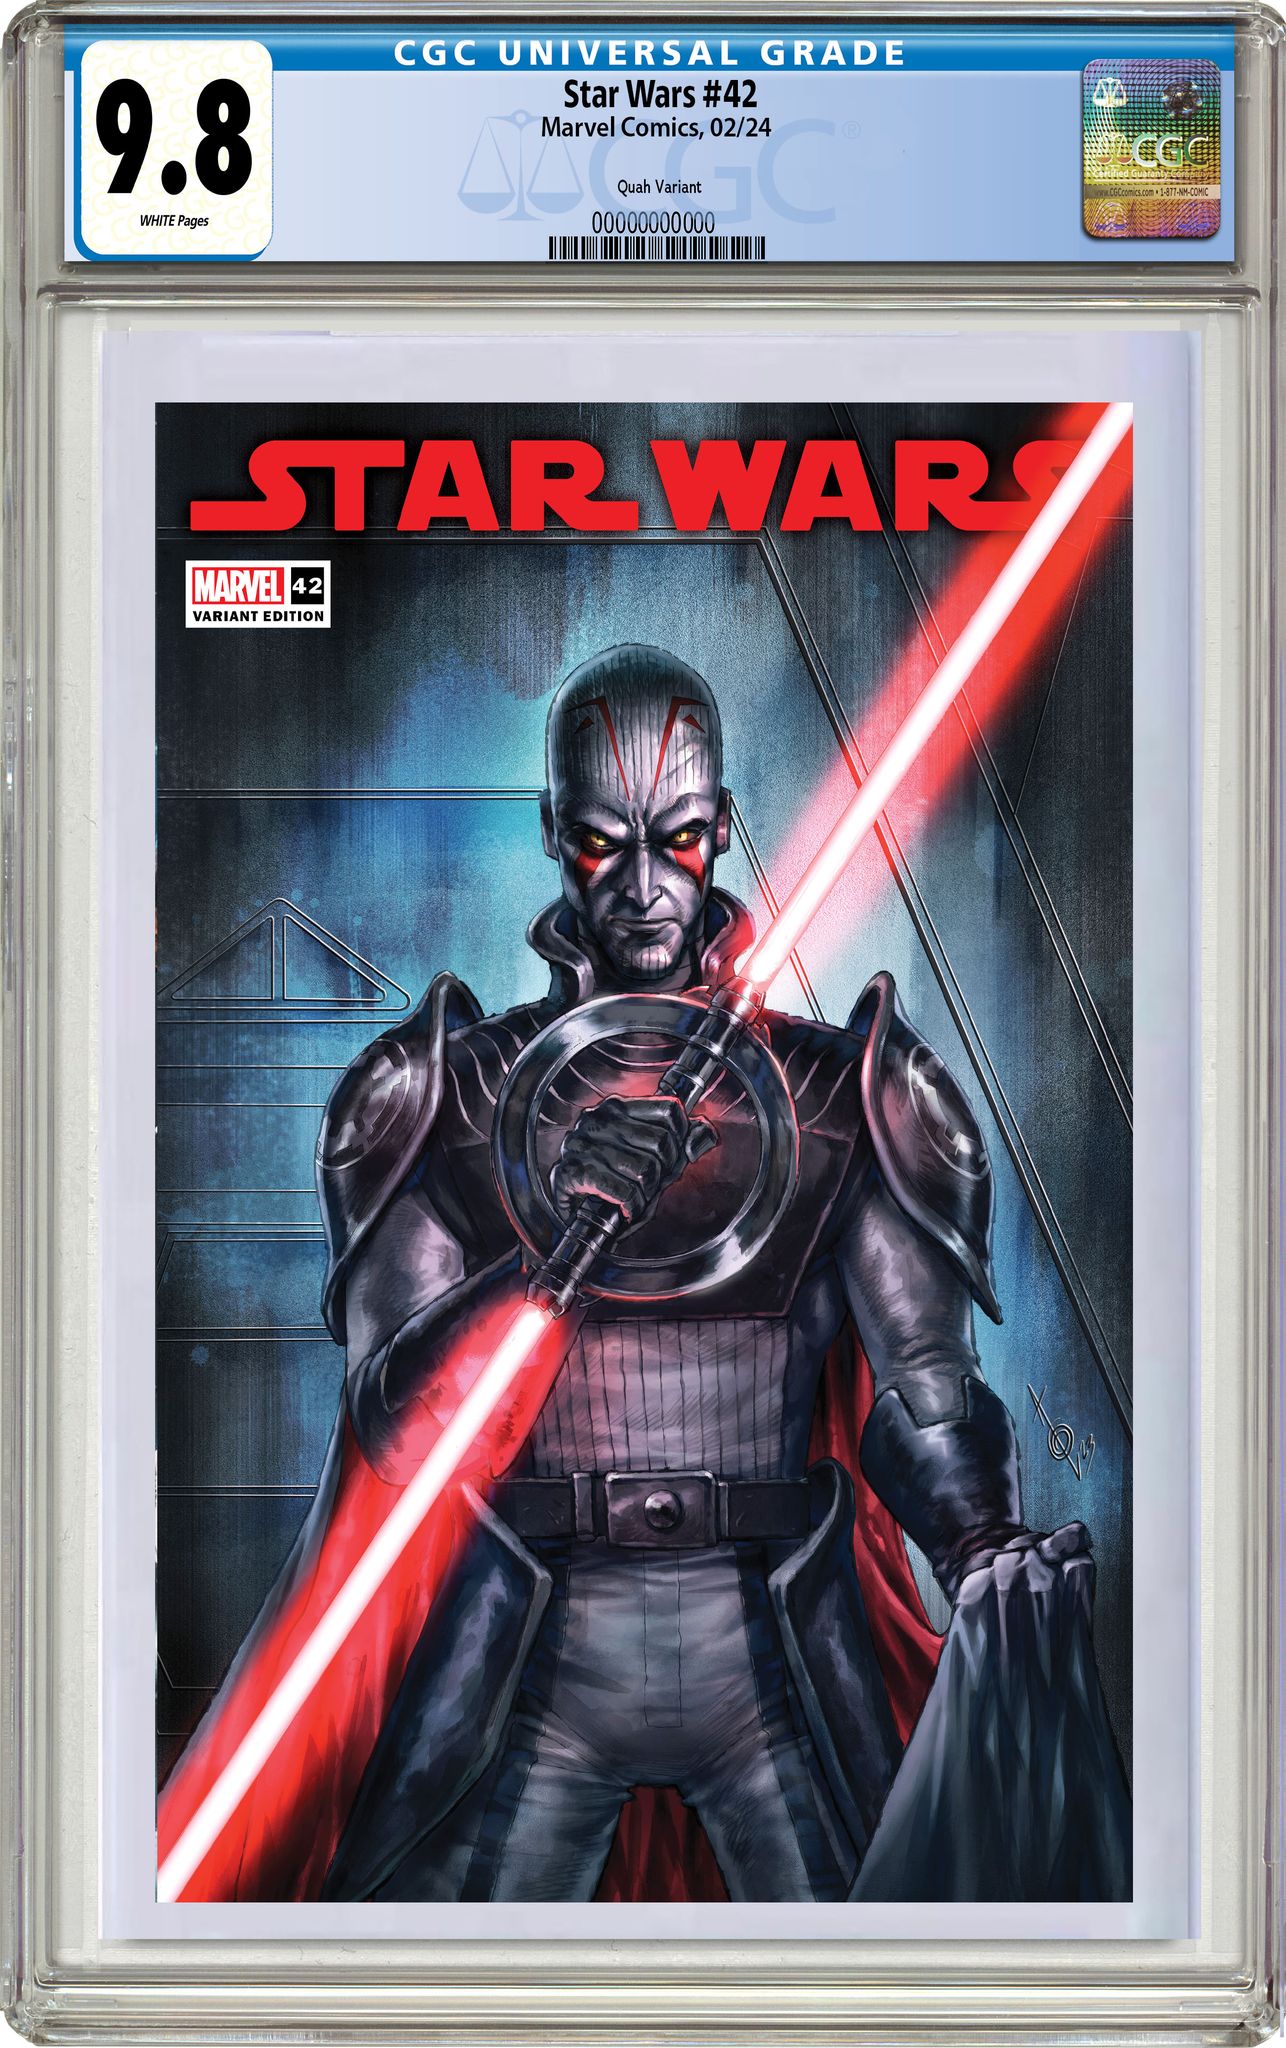 STAR WARS 42 ALAN QUAH REBELS 10TH ANNIVERSARY LIMITED EDITION #1 OF 4 EXCLUSIVE SERIES OPTIONS - 01/10/24 (M31)